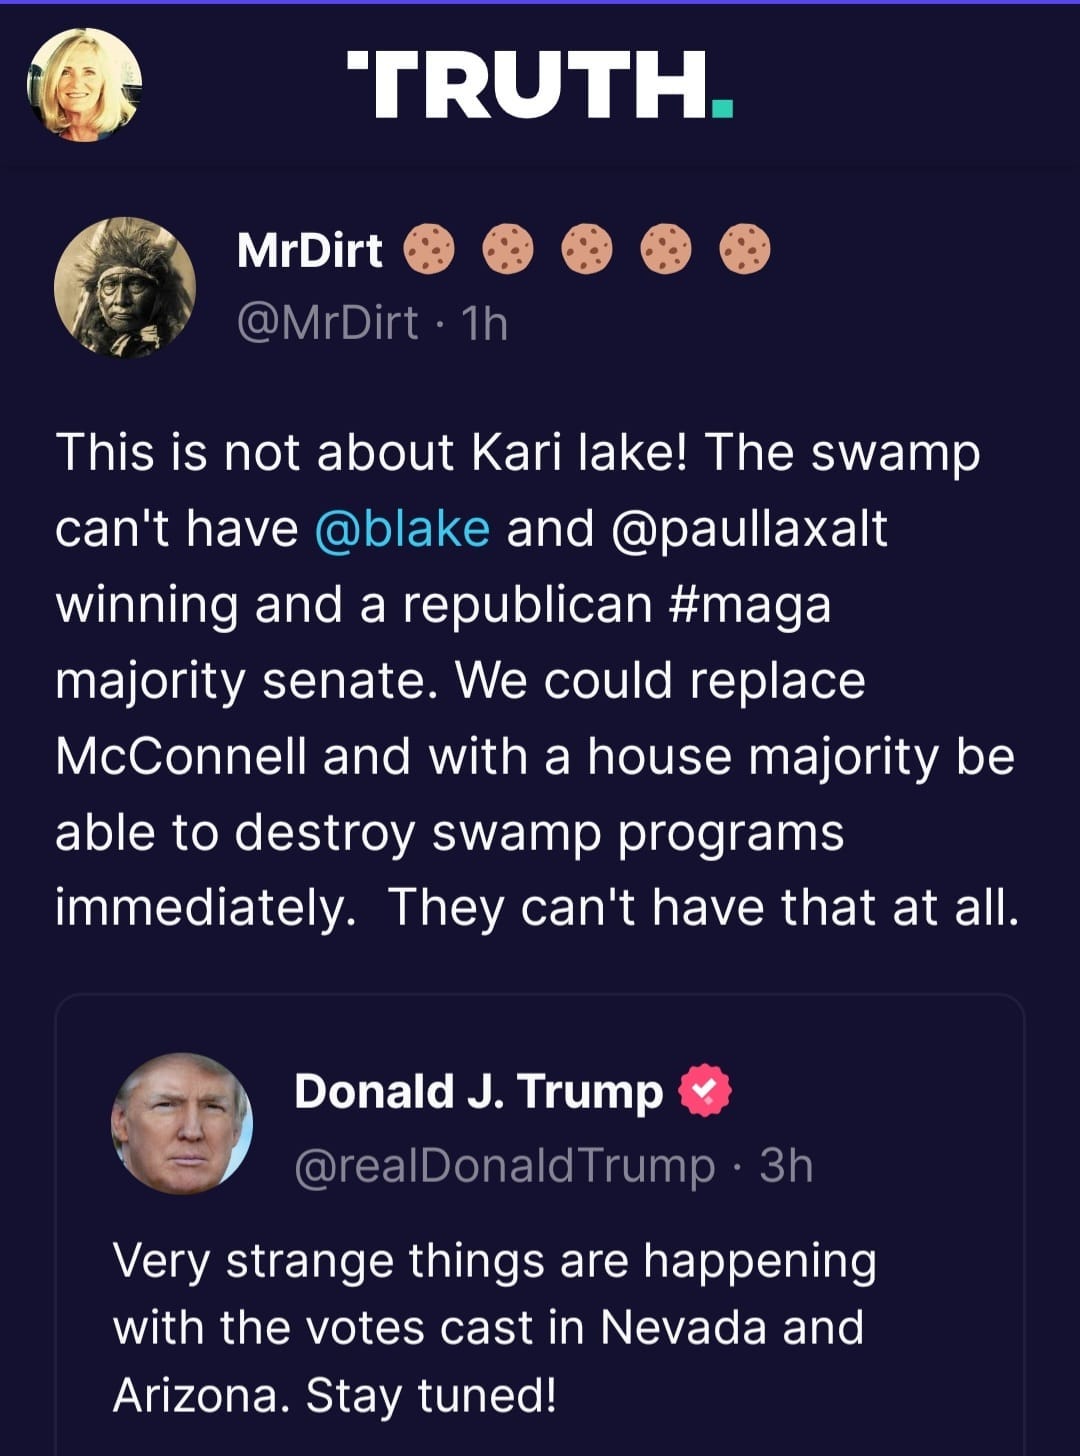 May be a Twitter screenshot of 2 people and text that says 'TRUTH. MrDirt @MrDirt·1h @MrDirt This is not about Kari ake! The swamp can't have @blake and @paullaxalt winning and a republican #maga majority senate. We could replace McConnell and with a house majority be able to destroy swamp programs immediately. They can't have that at all. Donald J. Trump @realDonaldTrump 3h Very strange things are happening with the votes cast in Nevada and Arizona. Stay tuned!'